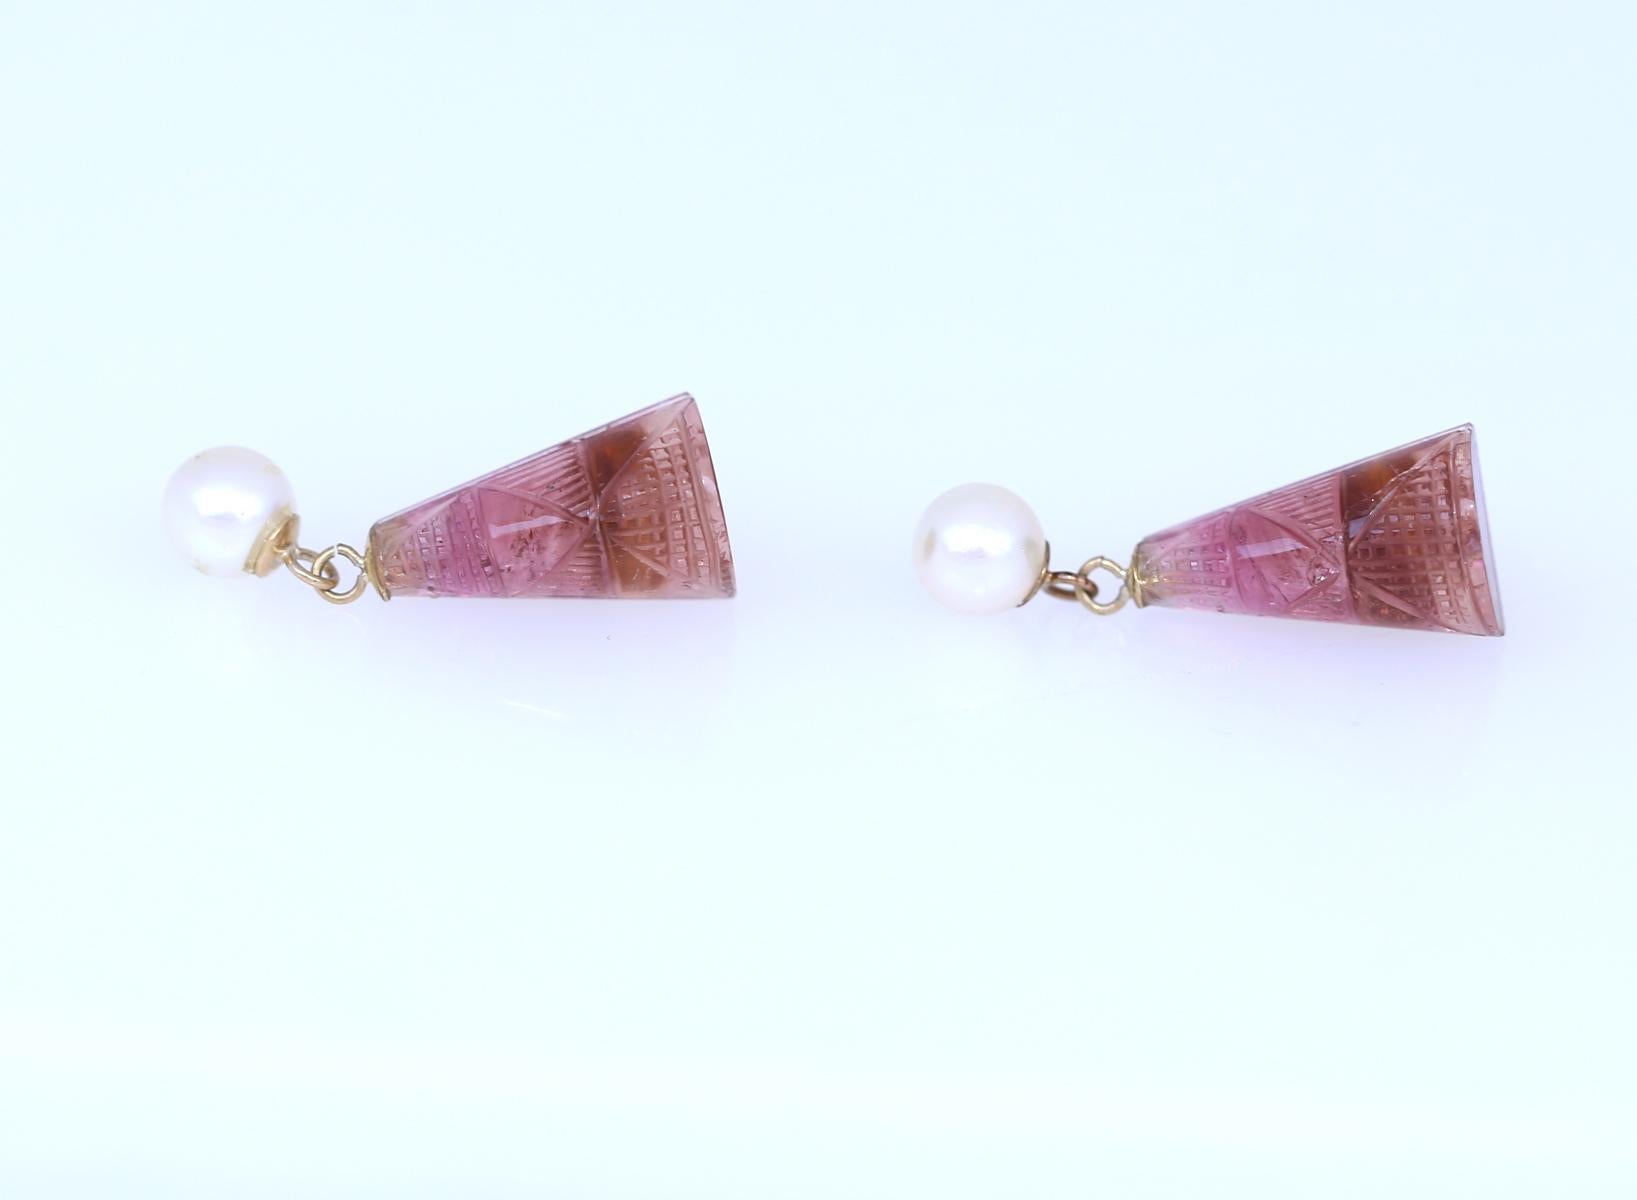 Fine engraved Tourmalines with a gradient in colour from dark orange to translucent pink. With hanging Akoya pearls. Really delicate and fine item. Very light both in design and weight, and yet it has a real presence that only true vintage items